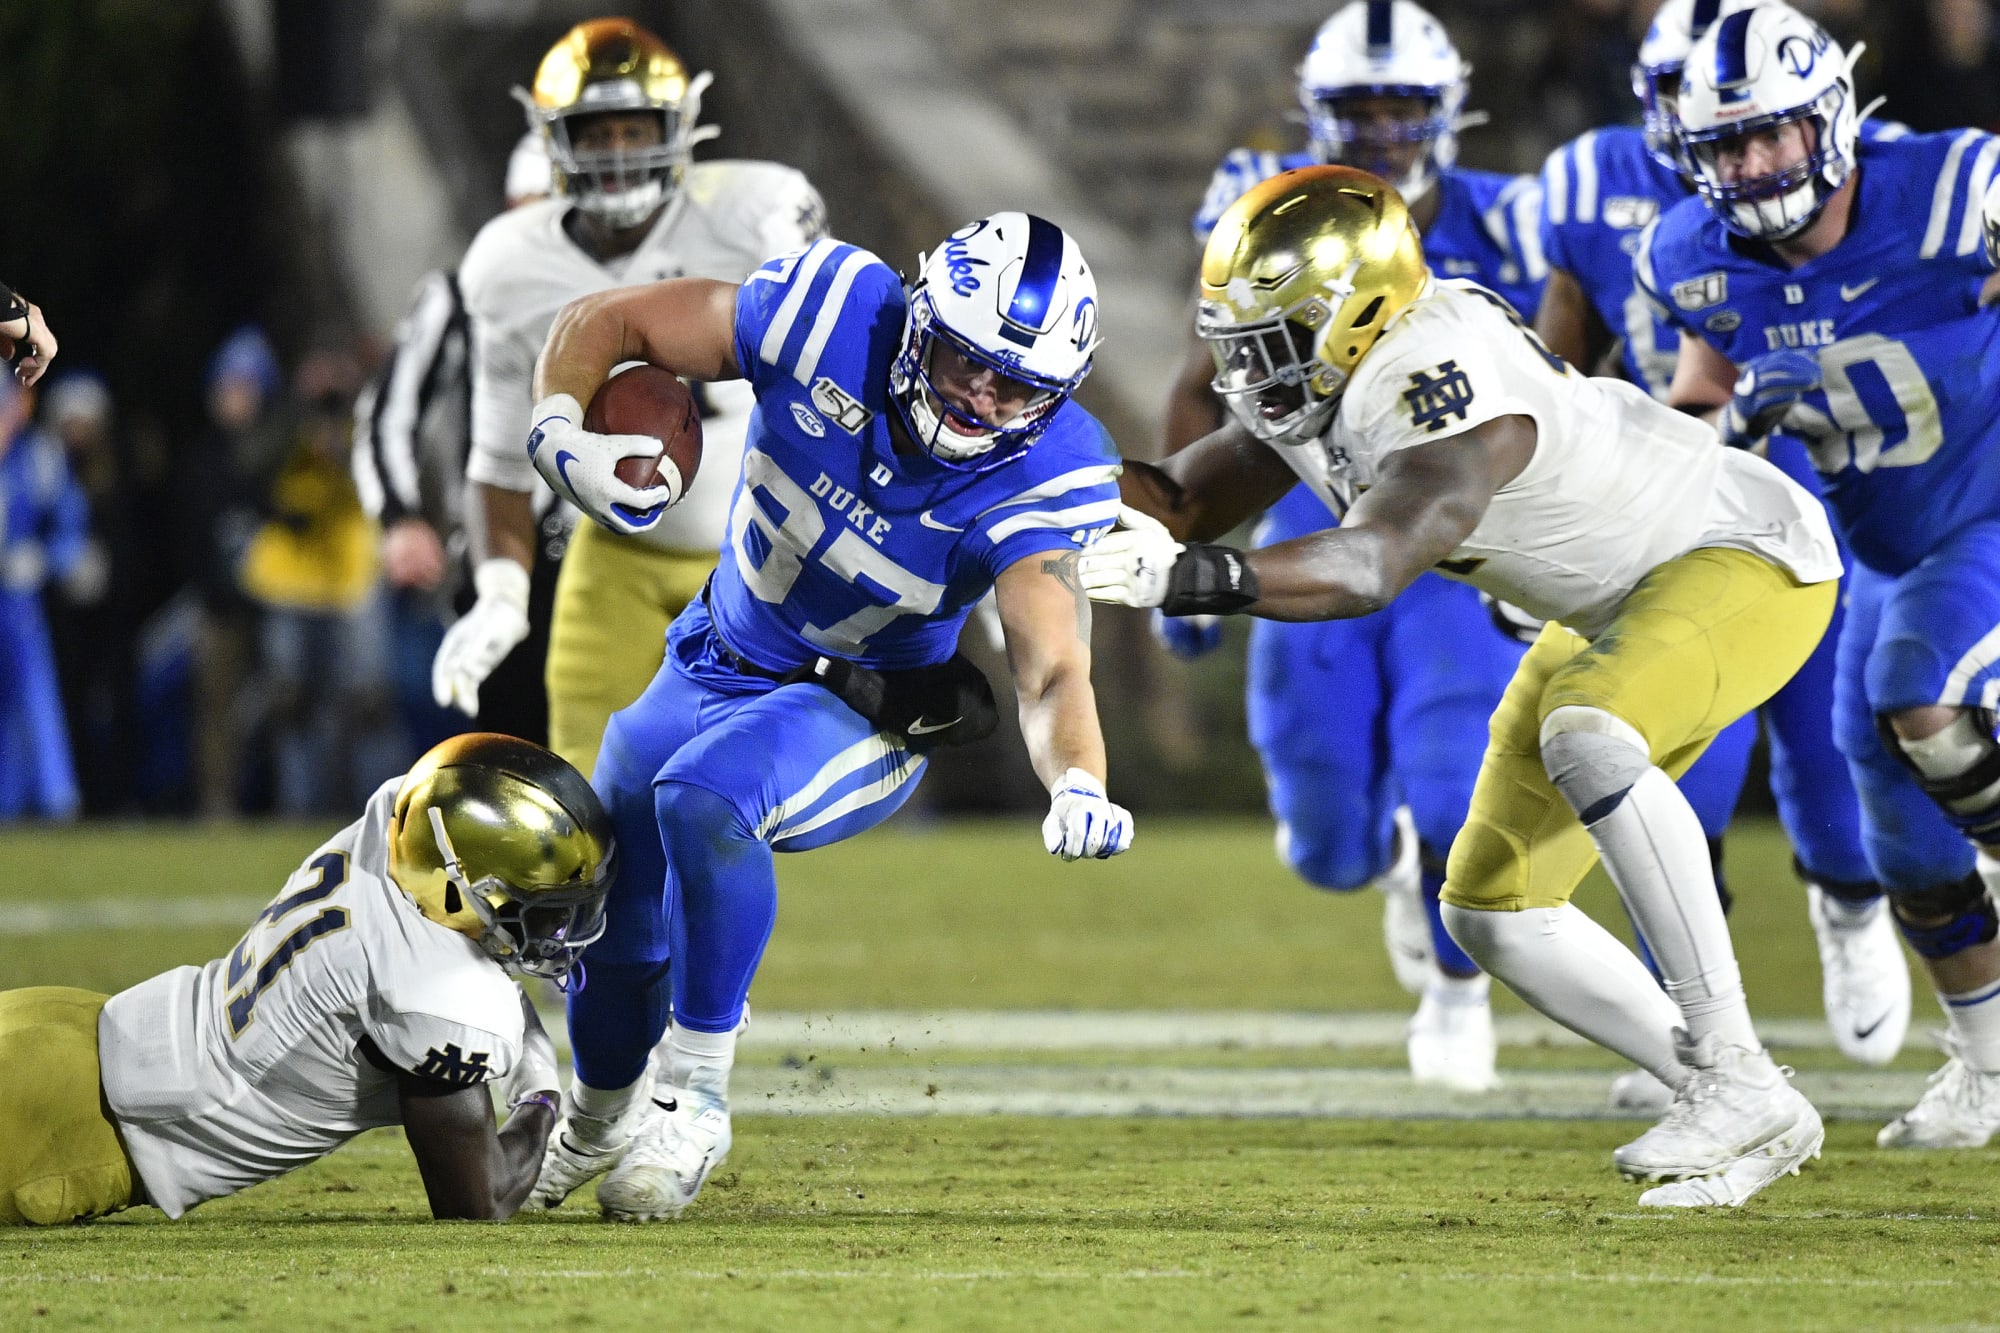 acc-revises-duke-football-schedule-because-of-covid-19-pandemic